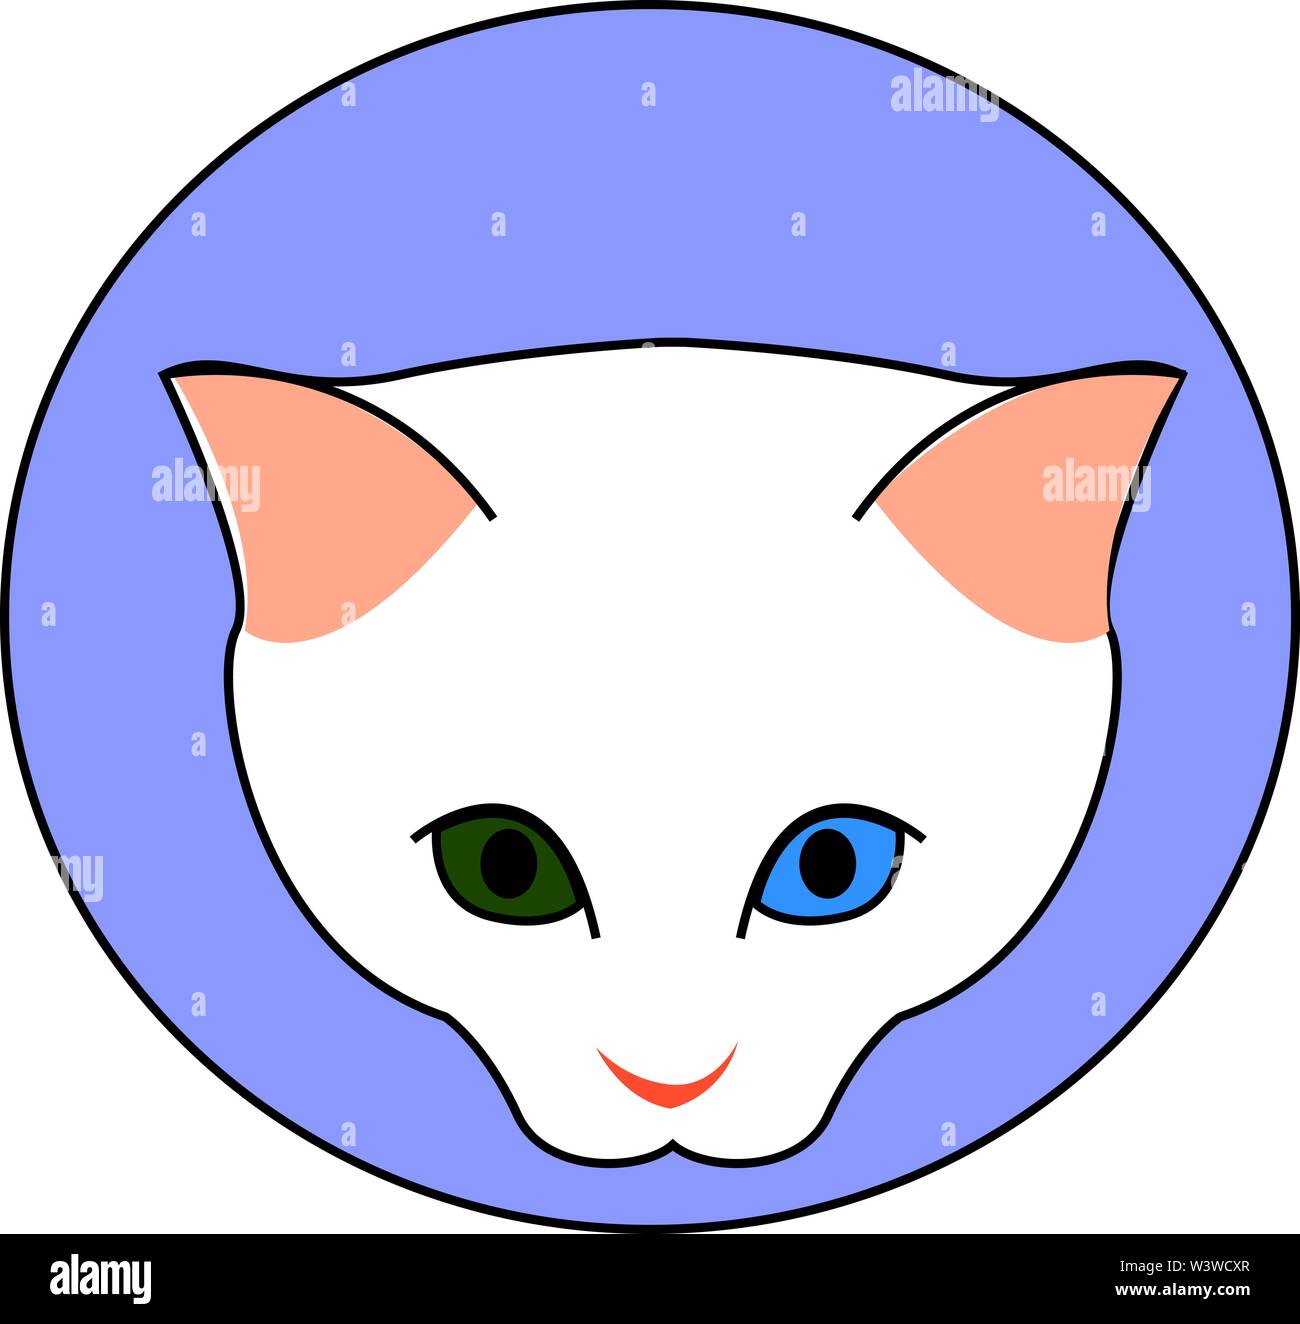 White cat with green and blue eye, illustration, vector on white background. Stock Vector